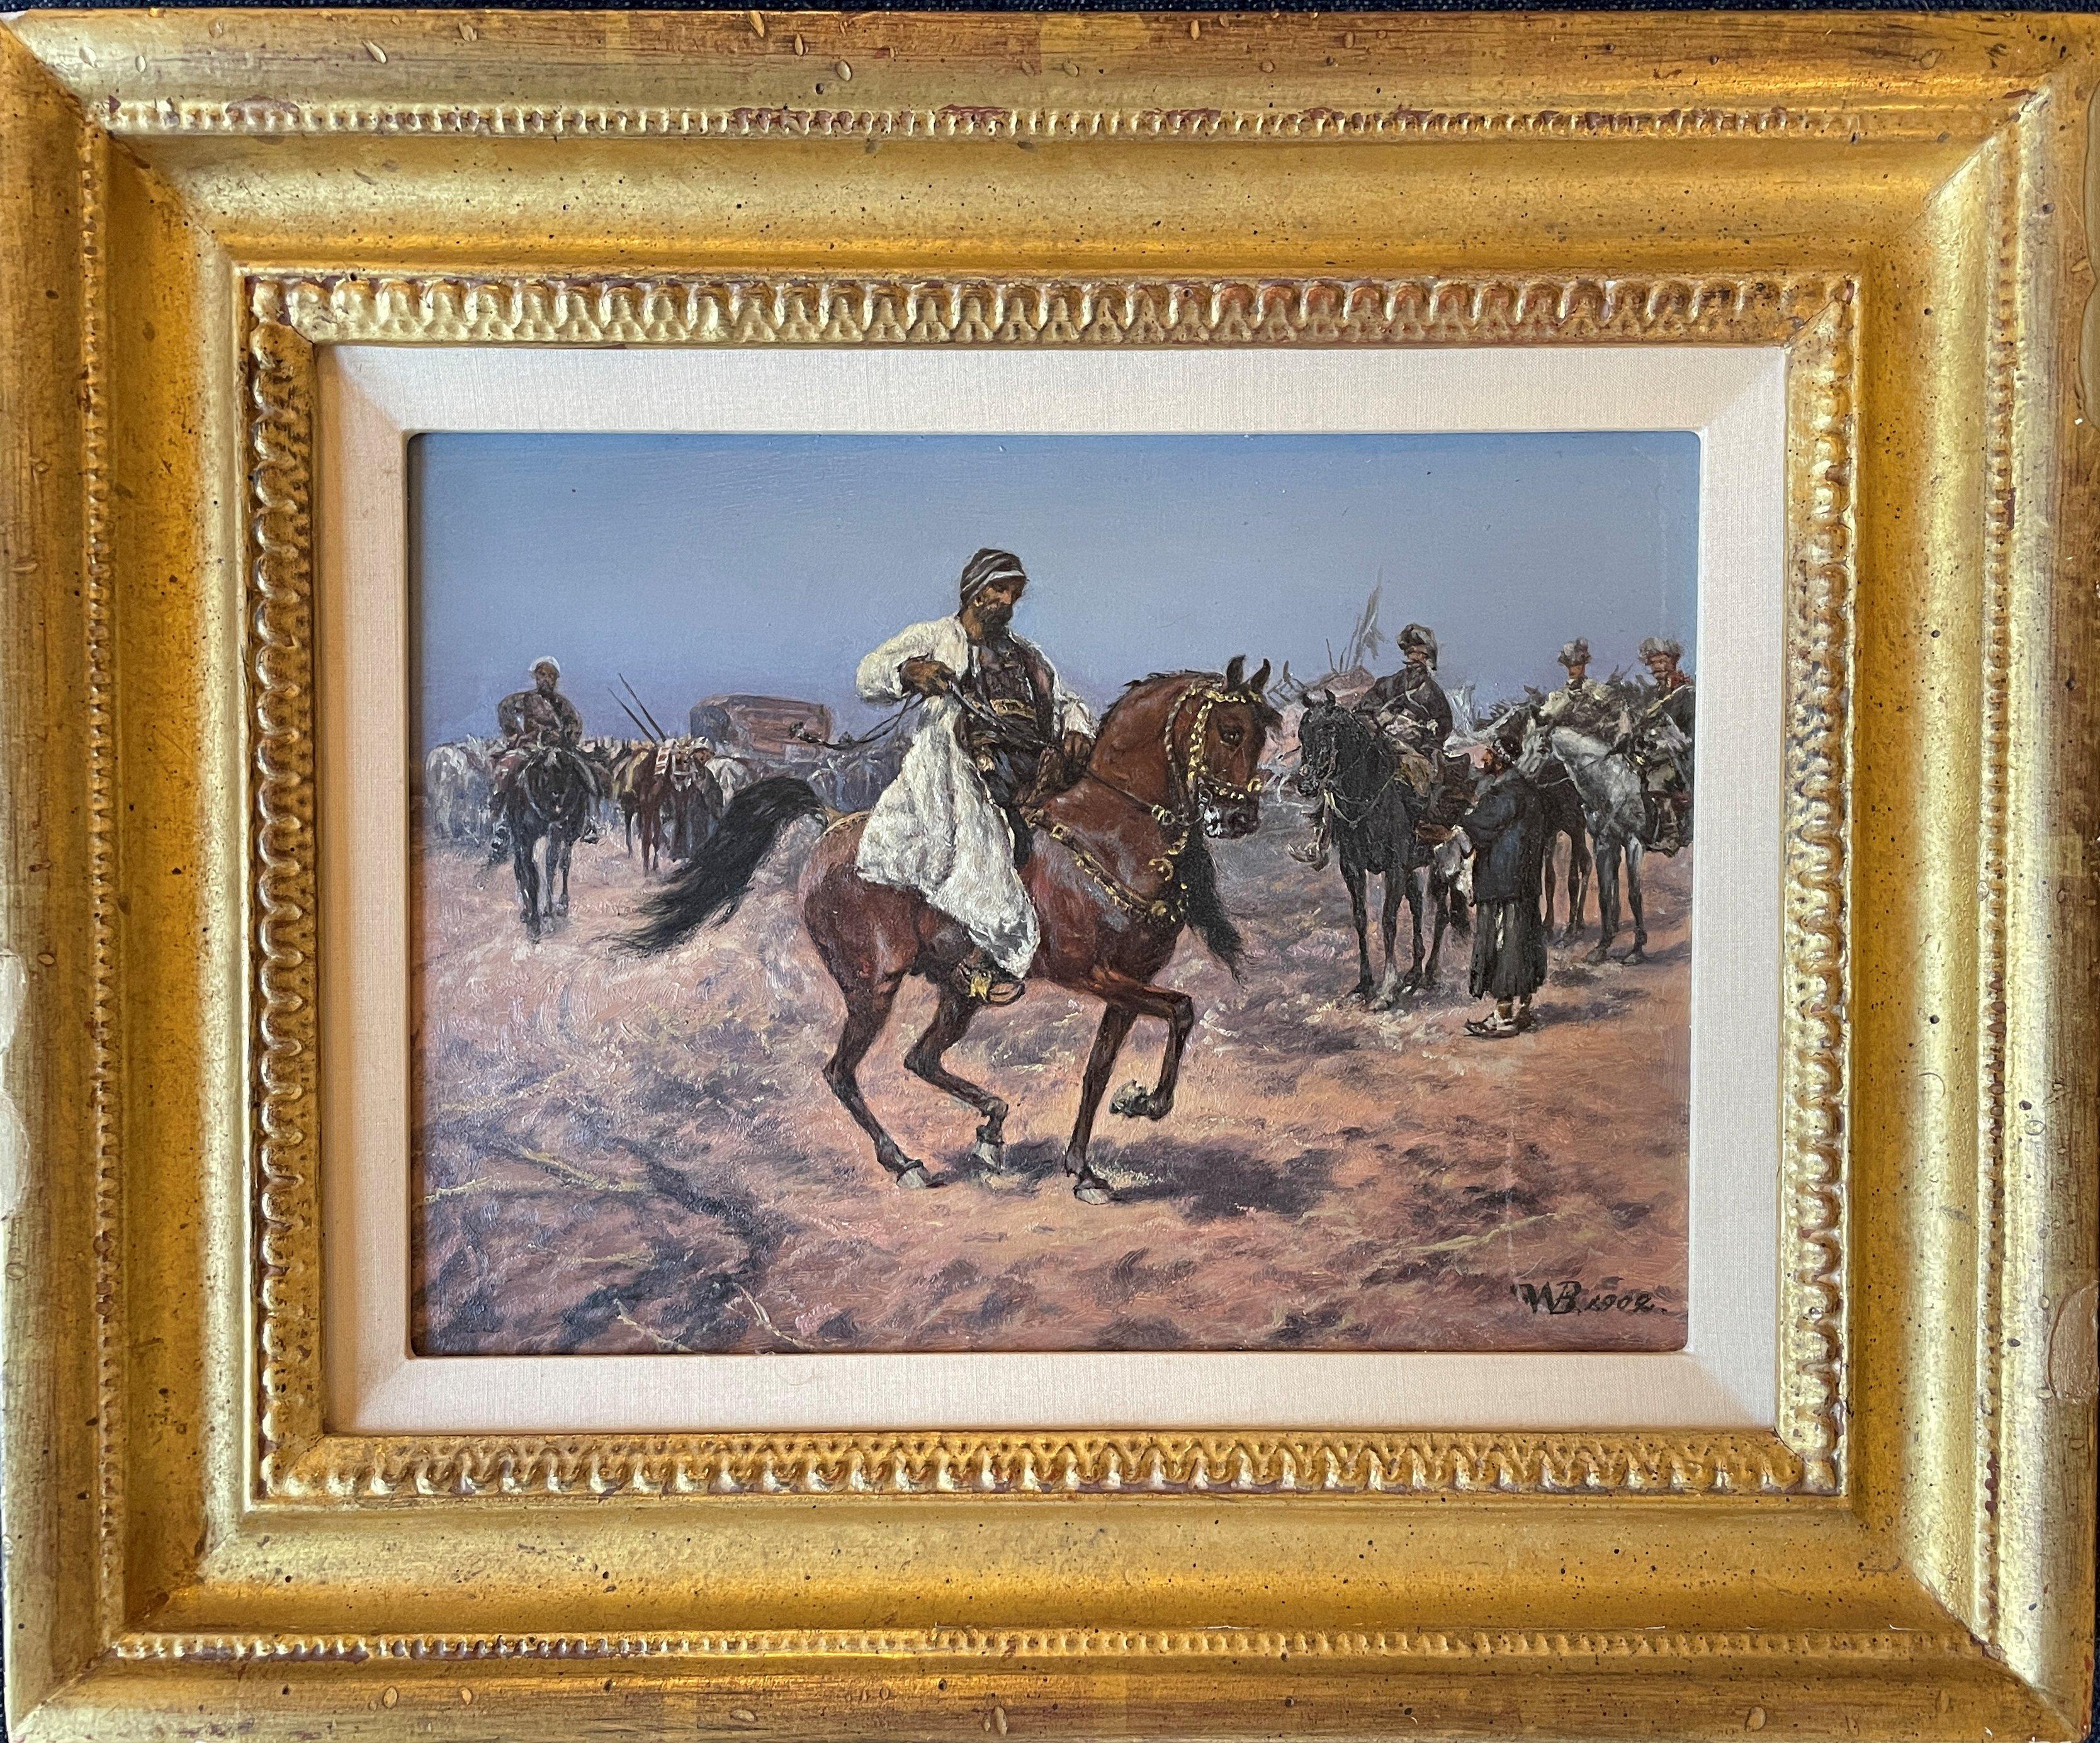 Frederick William Billing (1835 - 1914)
Algerian Horsemen in the Desert (Arabian Horses), 1902
Oil on board
7 x 9 3/4 inches
Signed and dated lower right

Provenance:
R. H. Love Galleries, Chicago
Private Collection, Orion Lake, Michigan

Frederick